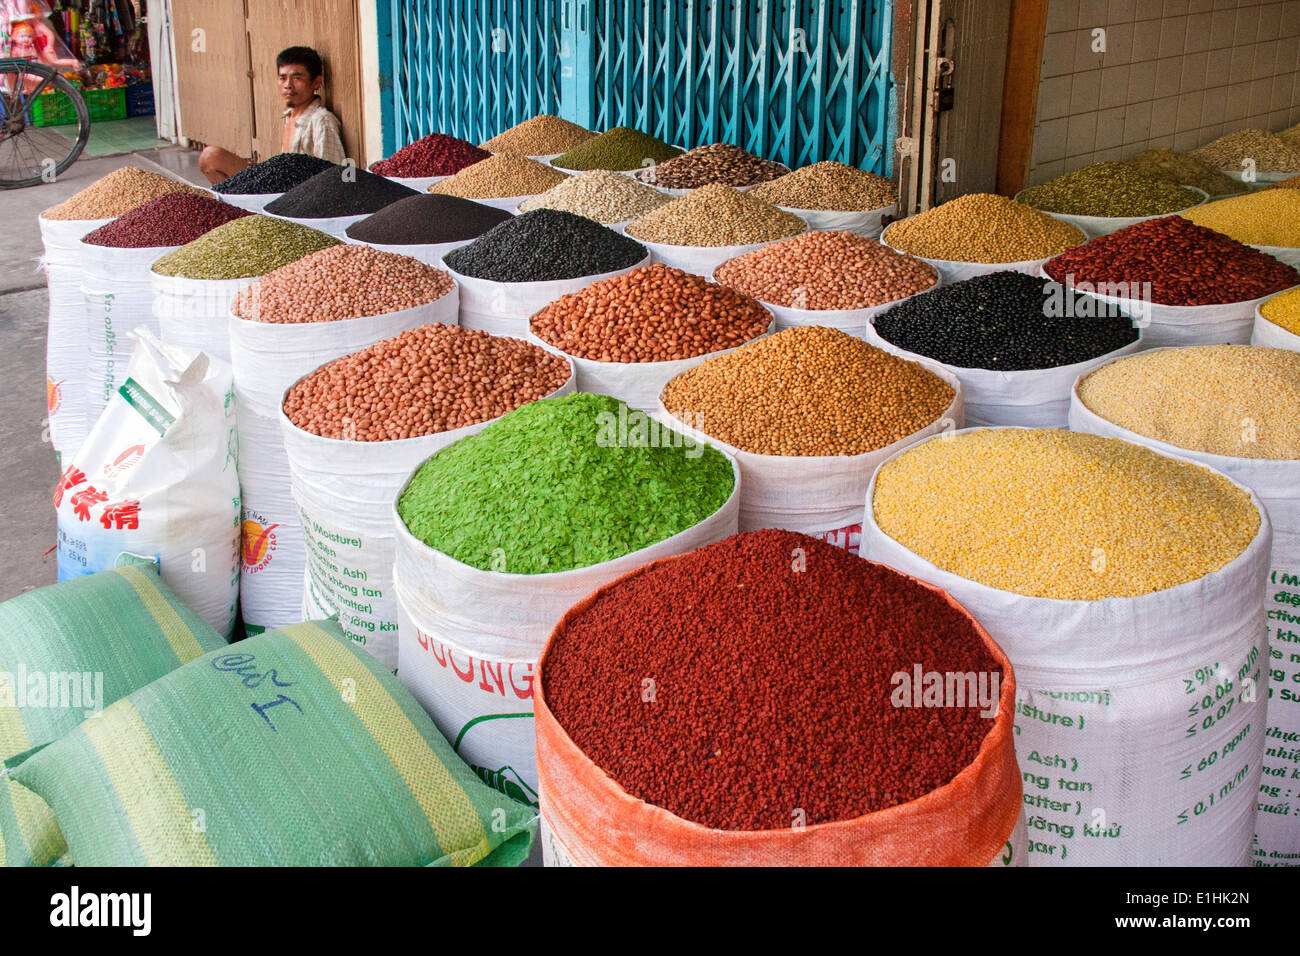 Market vendor offering various sorts of beans, spices and grains, Ho Chi Minh City, Vietnam Stock Photo